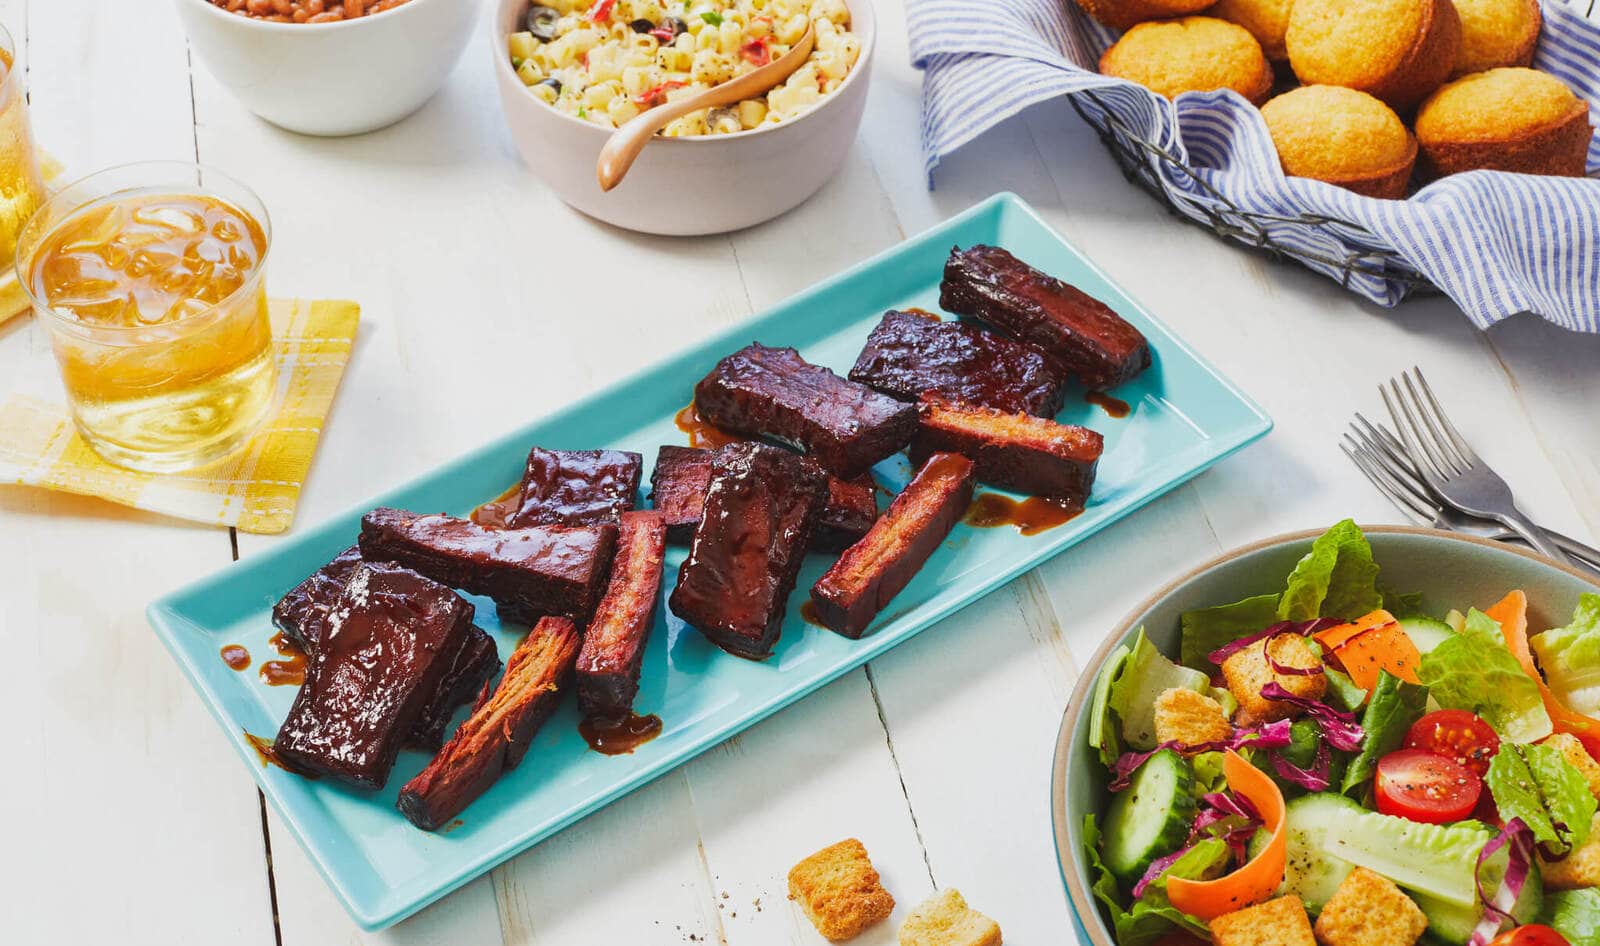 How These Vegan Ribs Help Anheuser-Busch Make More Sustainable Beer